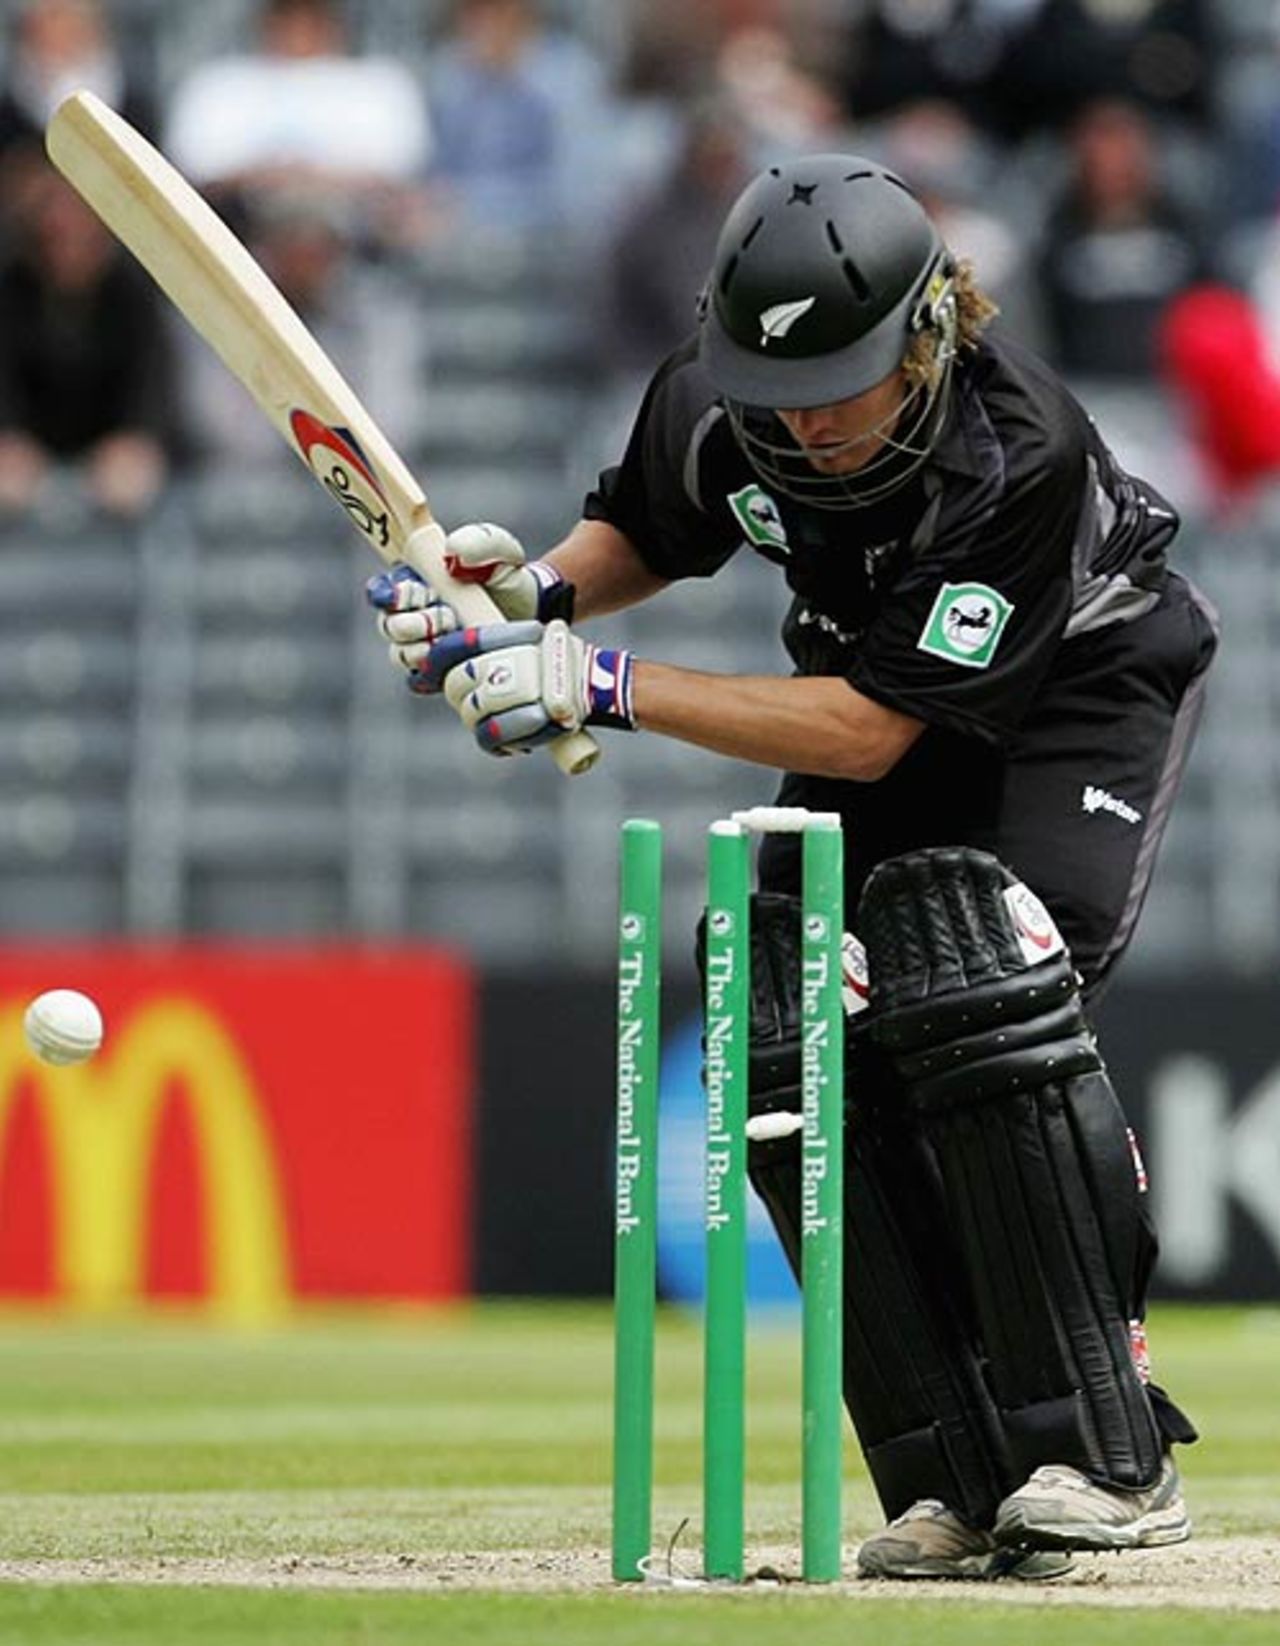 Hamish Marshall cannot stop the ball from bouncing on to his stumps, New Zealand v Sri Lanka, 3rd ODI, Christchurch, January 2, 2007